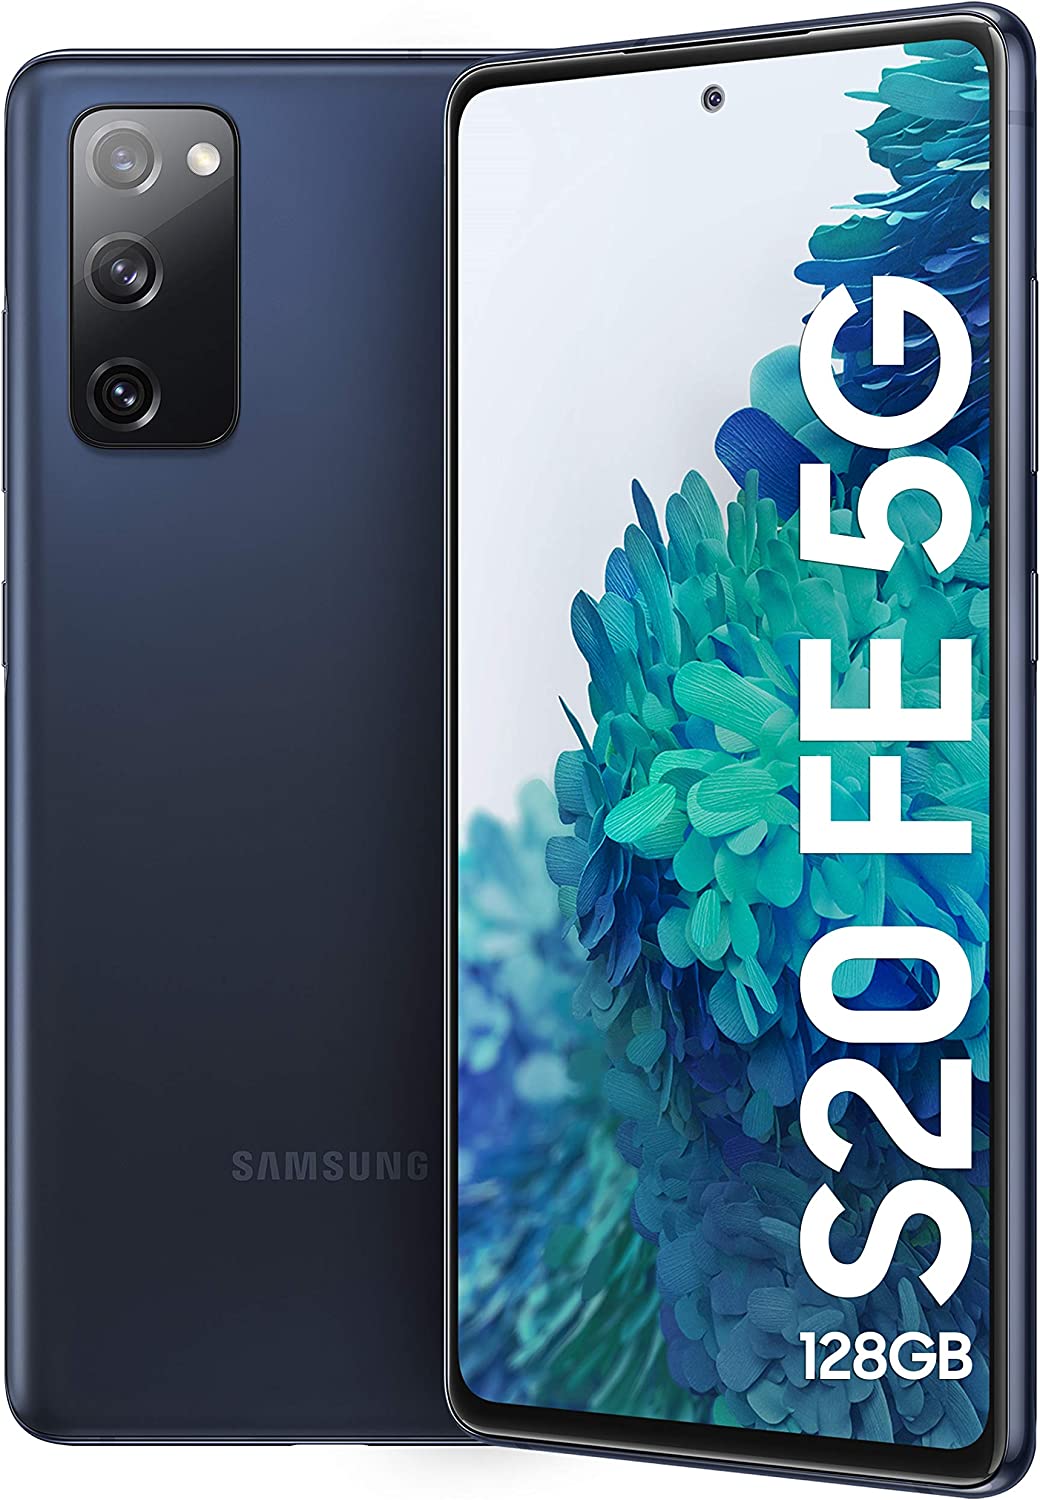 Samsung Galaxy S20 FE 5G Cloud Navy 8GB RAM 128GB Storage with No Cost EMI Additional Exchange Offers